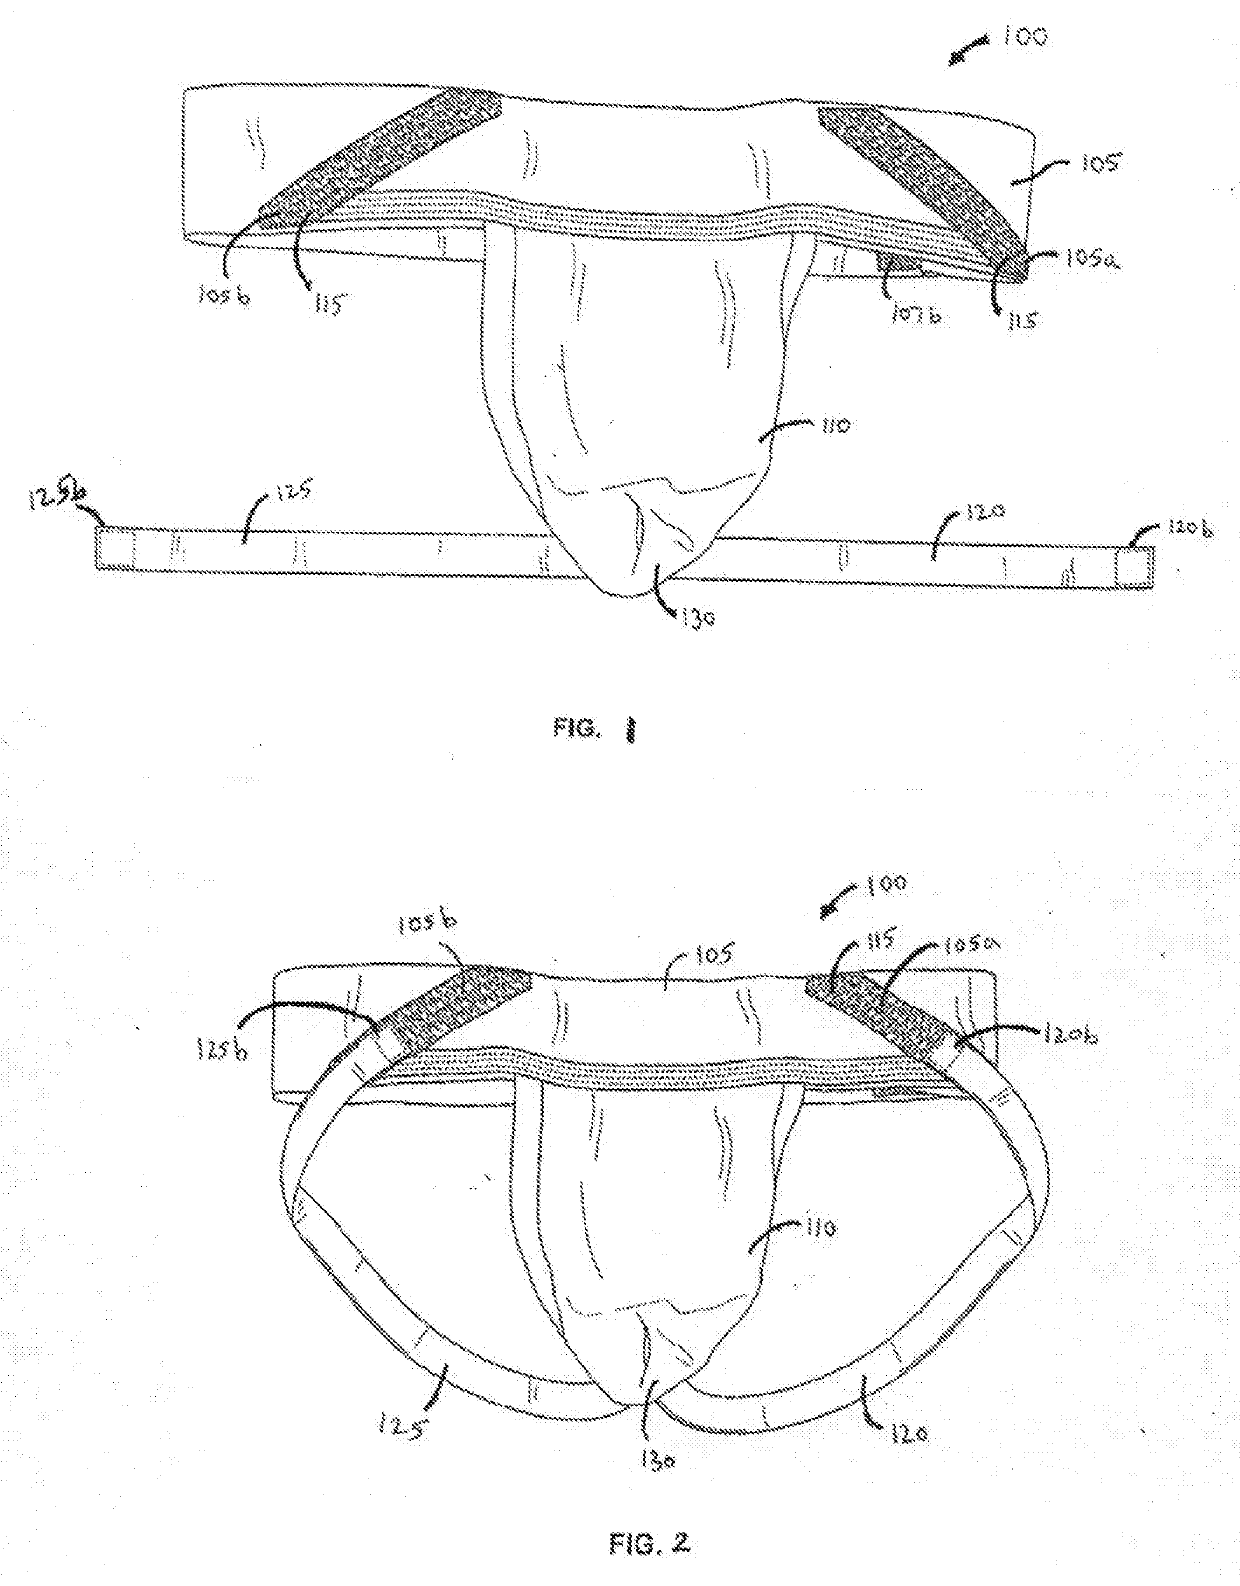 Unisex Pelvic Groin Support Garment With Adjustable Pouch, Waist Belt, And Straps Apparatus, And A Method of Using Same